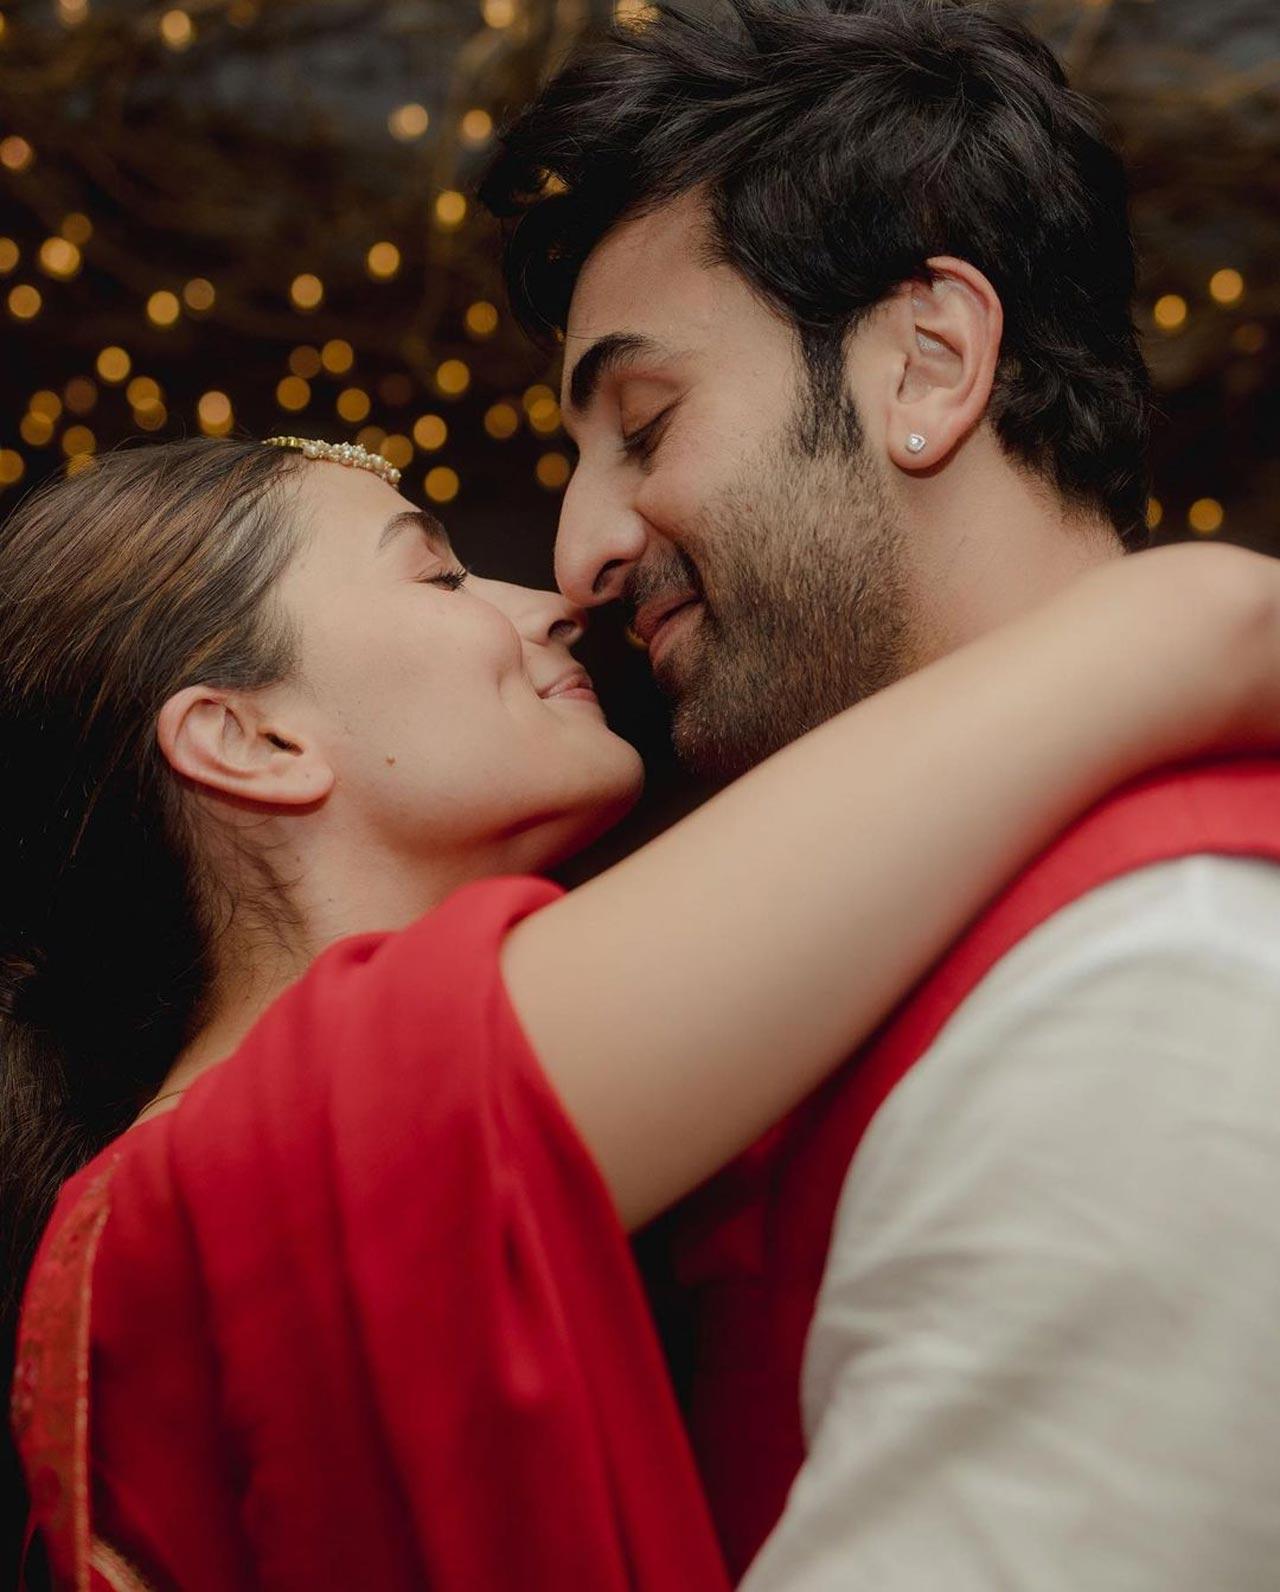 Ranbir Kapoor and Alia Bhatt
Now the age gap of 11 plus years did not hold these 2 back. A simple Shaadi in their house, and a baby on the way. Alia's spunk and Ranbir's calmness highlight a couple that brings out the best in each other. Whether it's encouraging each other's work or writing their own fate, these 2 do it their way and they slay